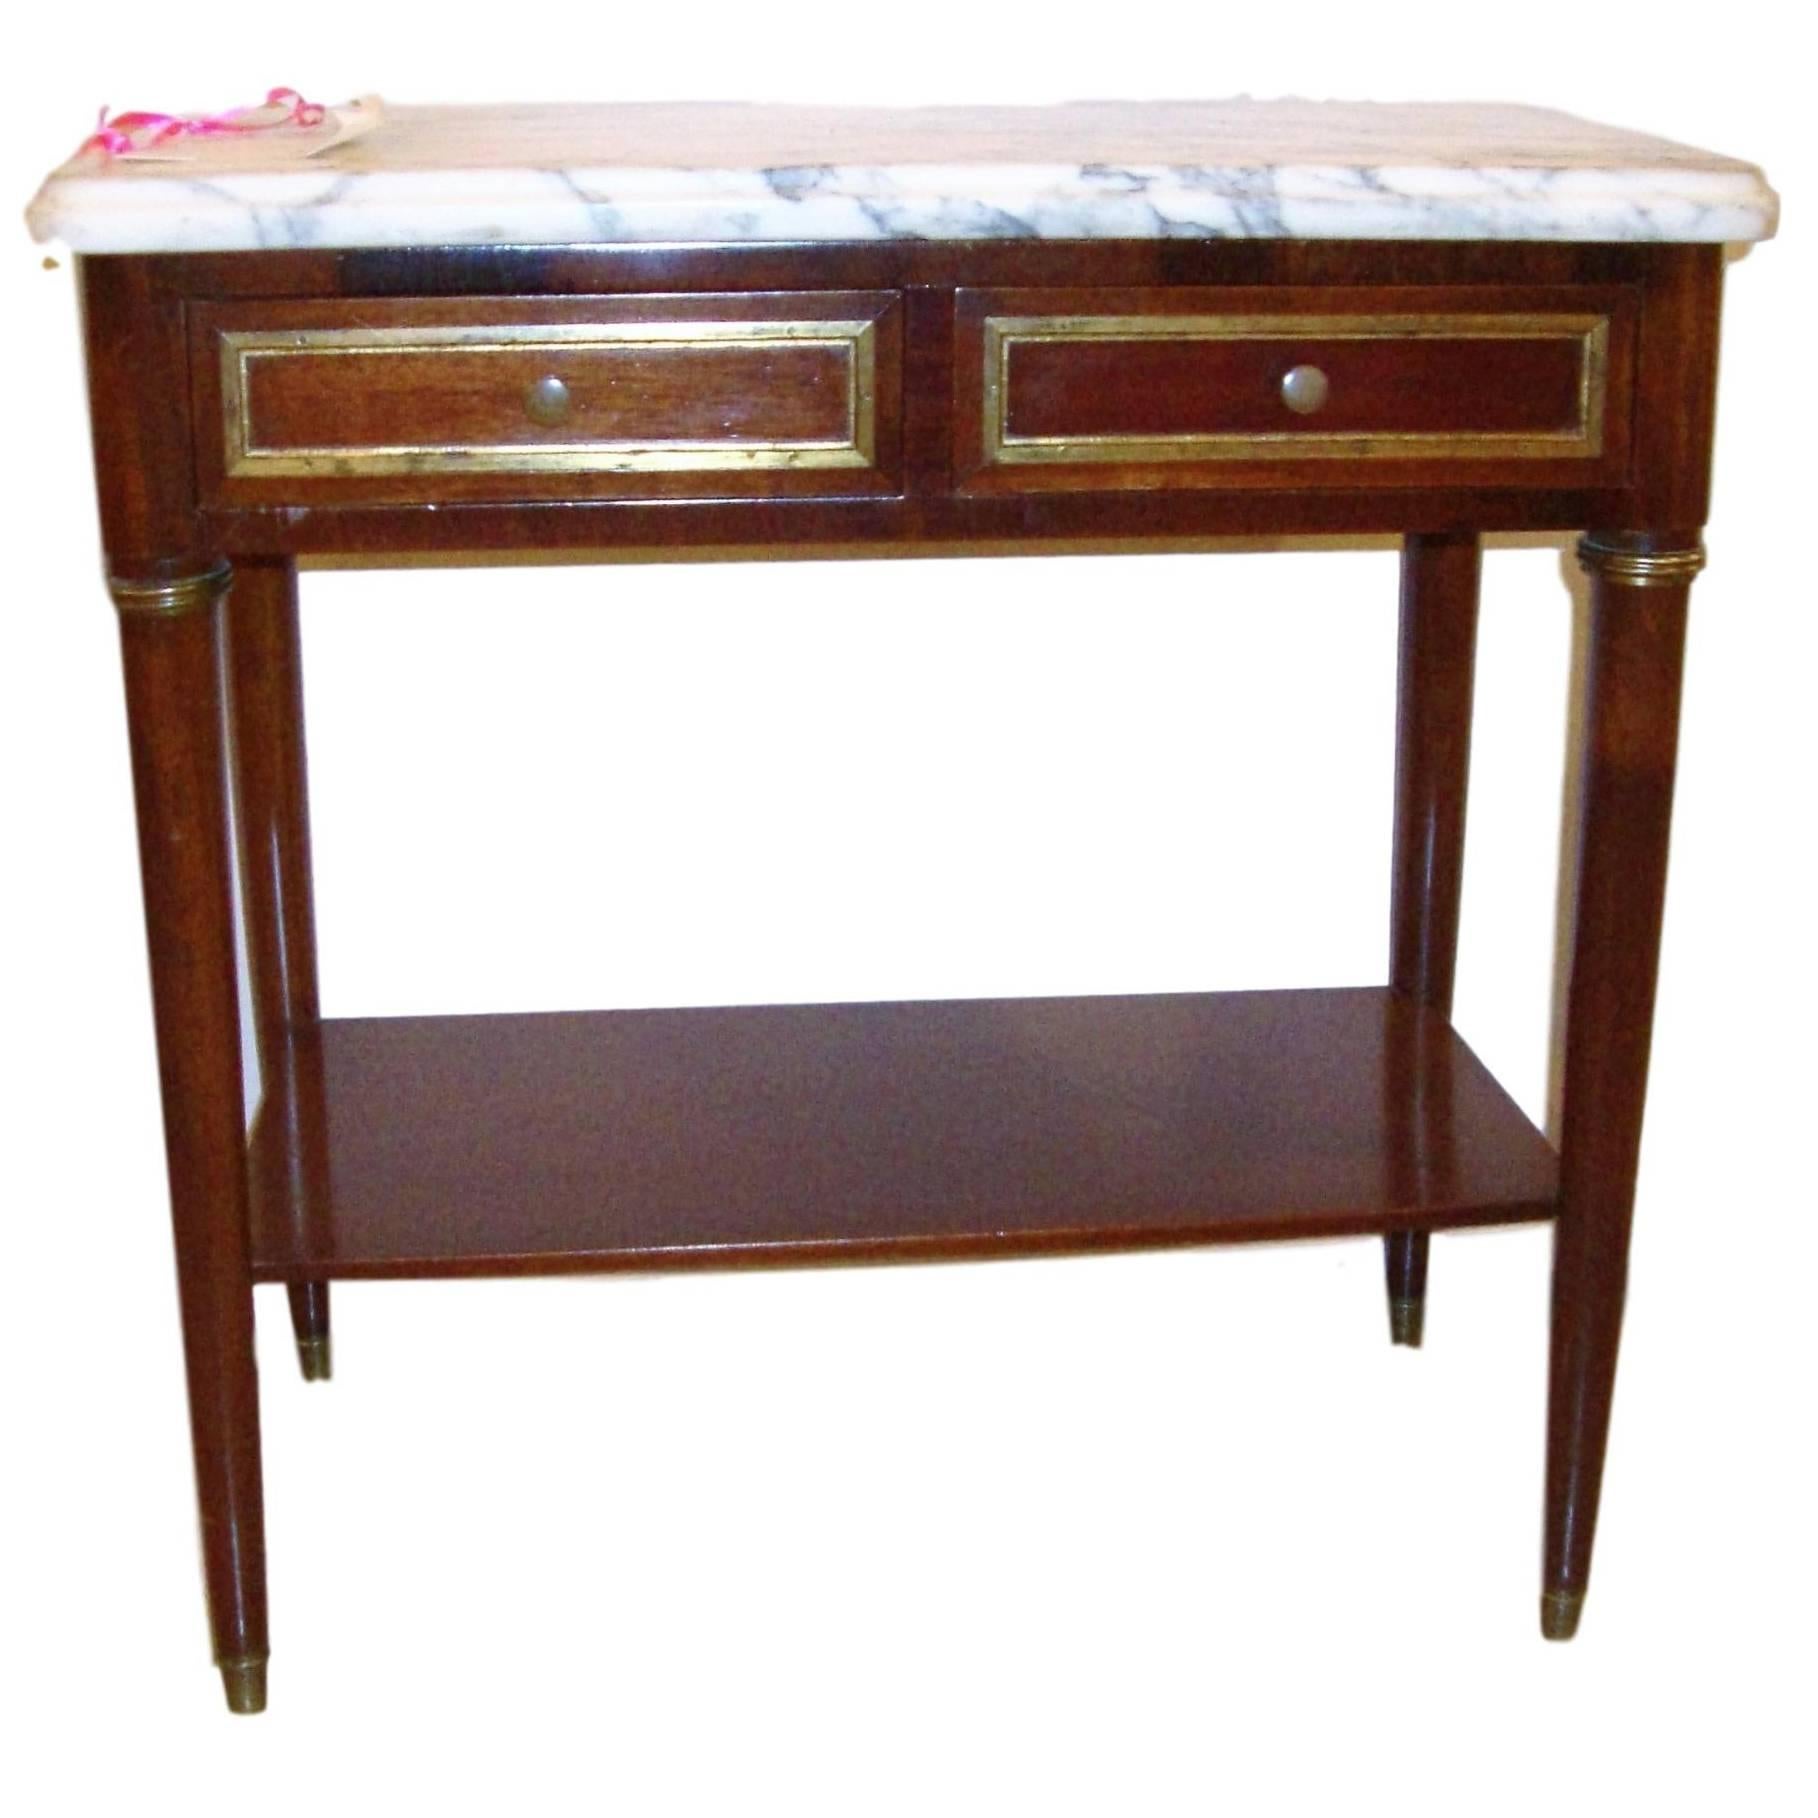 Diminutive Mahogany Marble Top End Table or Stand manner Jansen